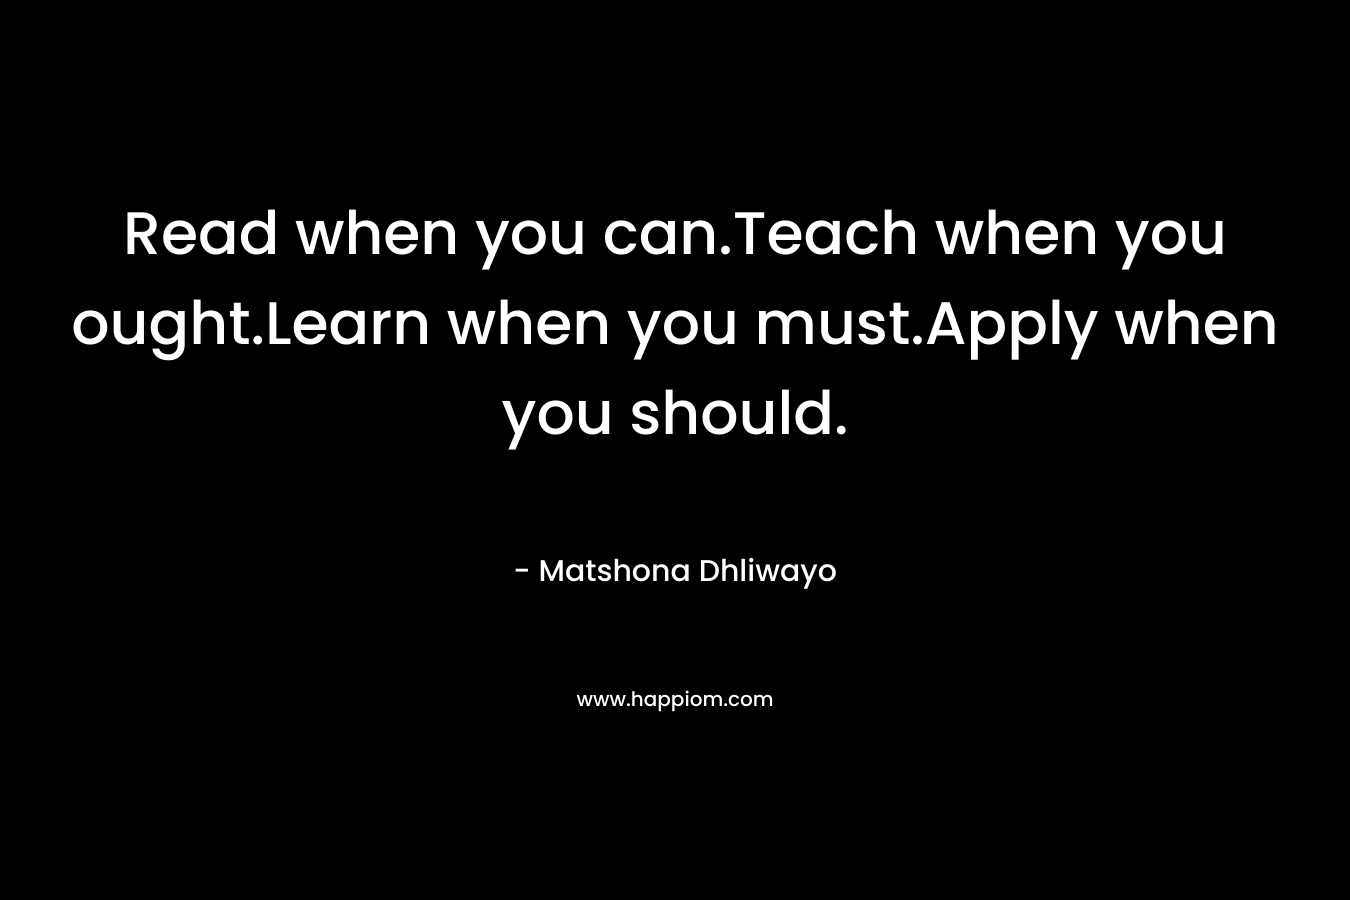 Read when you can.Teach when you ought.Learn when you must.Apply when you should.